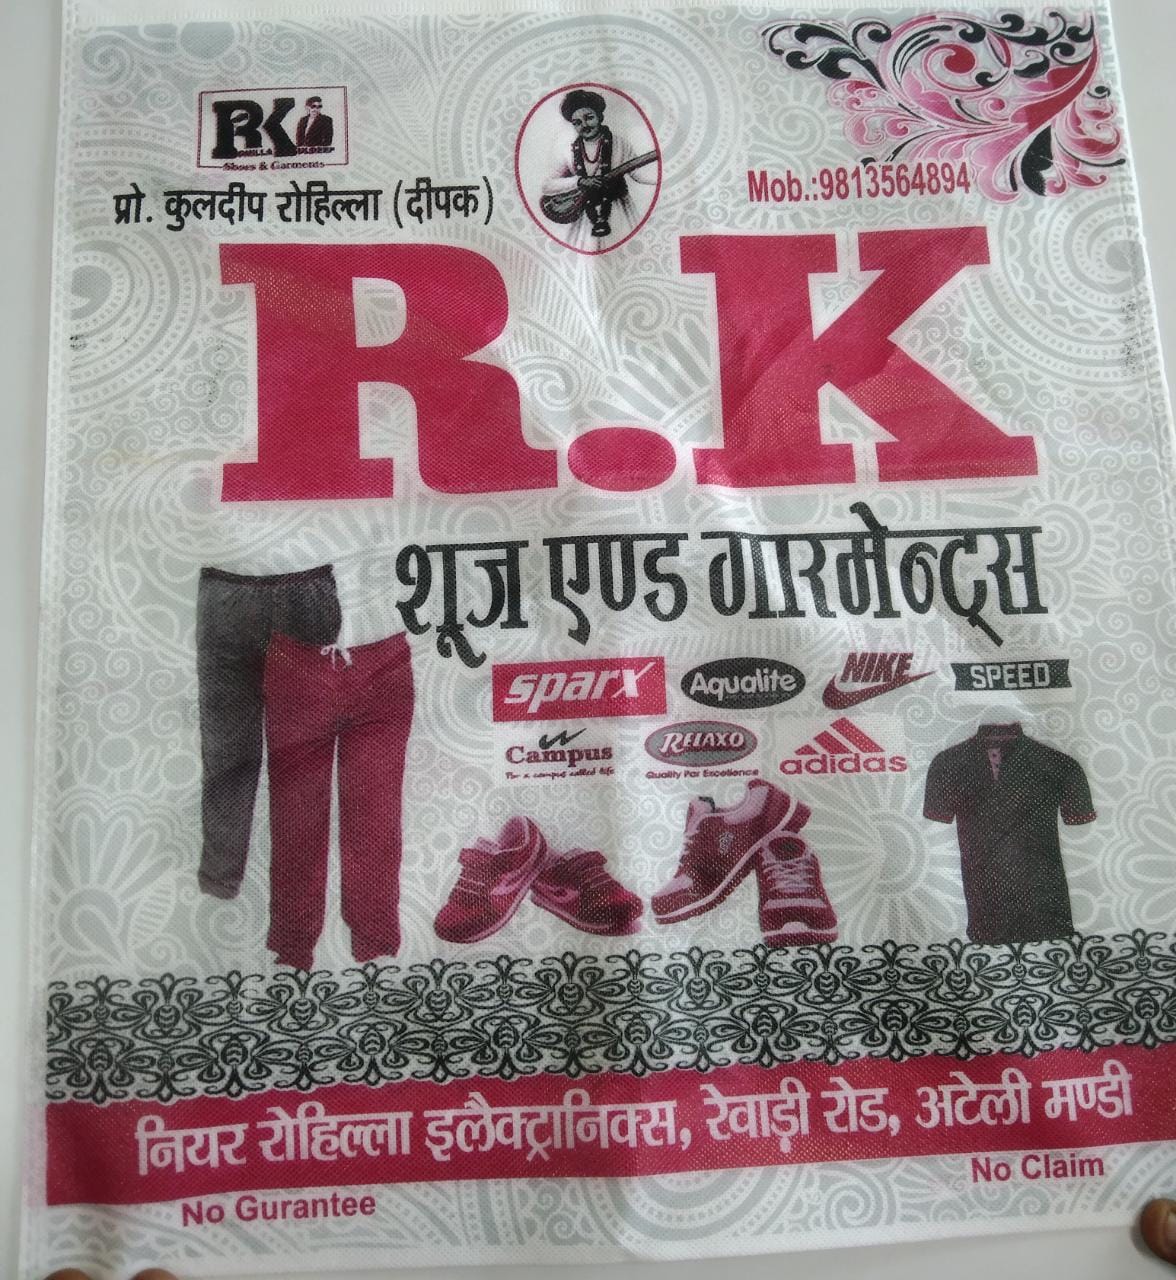 RK Shoes  and Garments